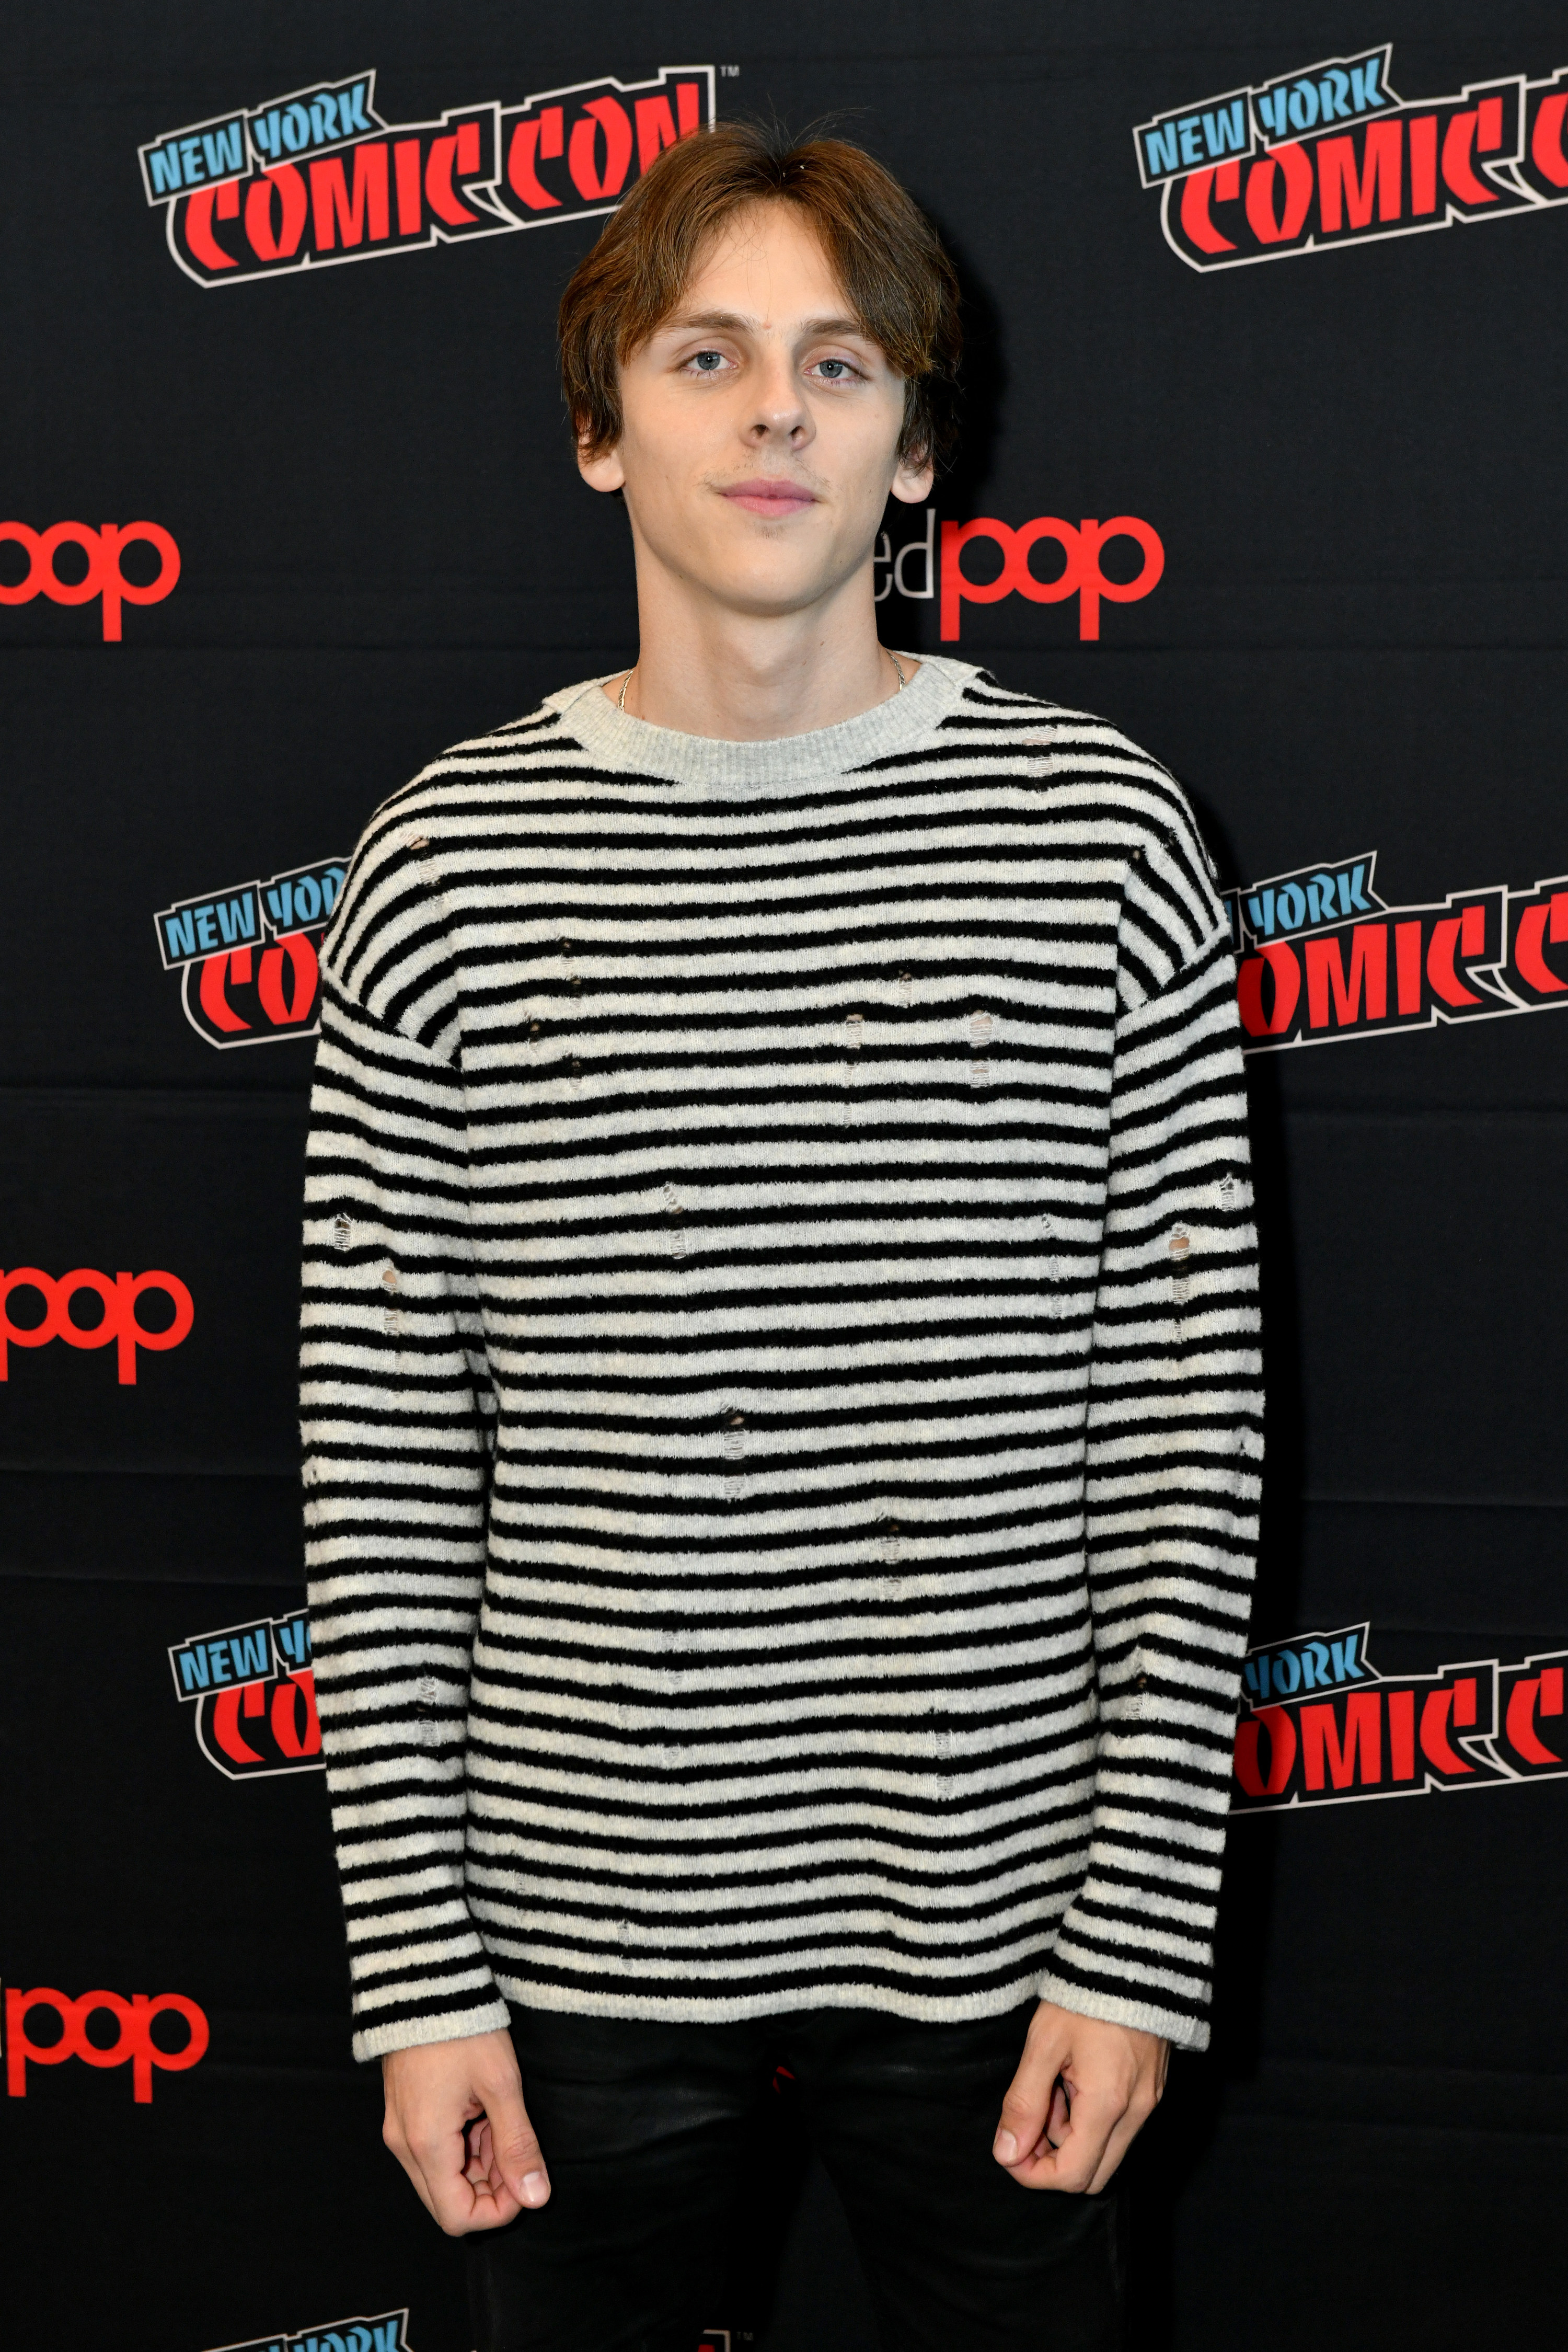 Jacob on the red carpet in a long-sleeved striped shirt